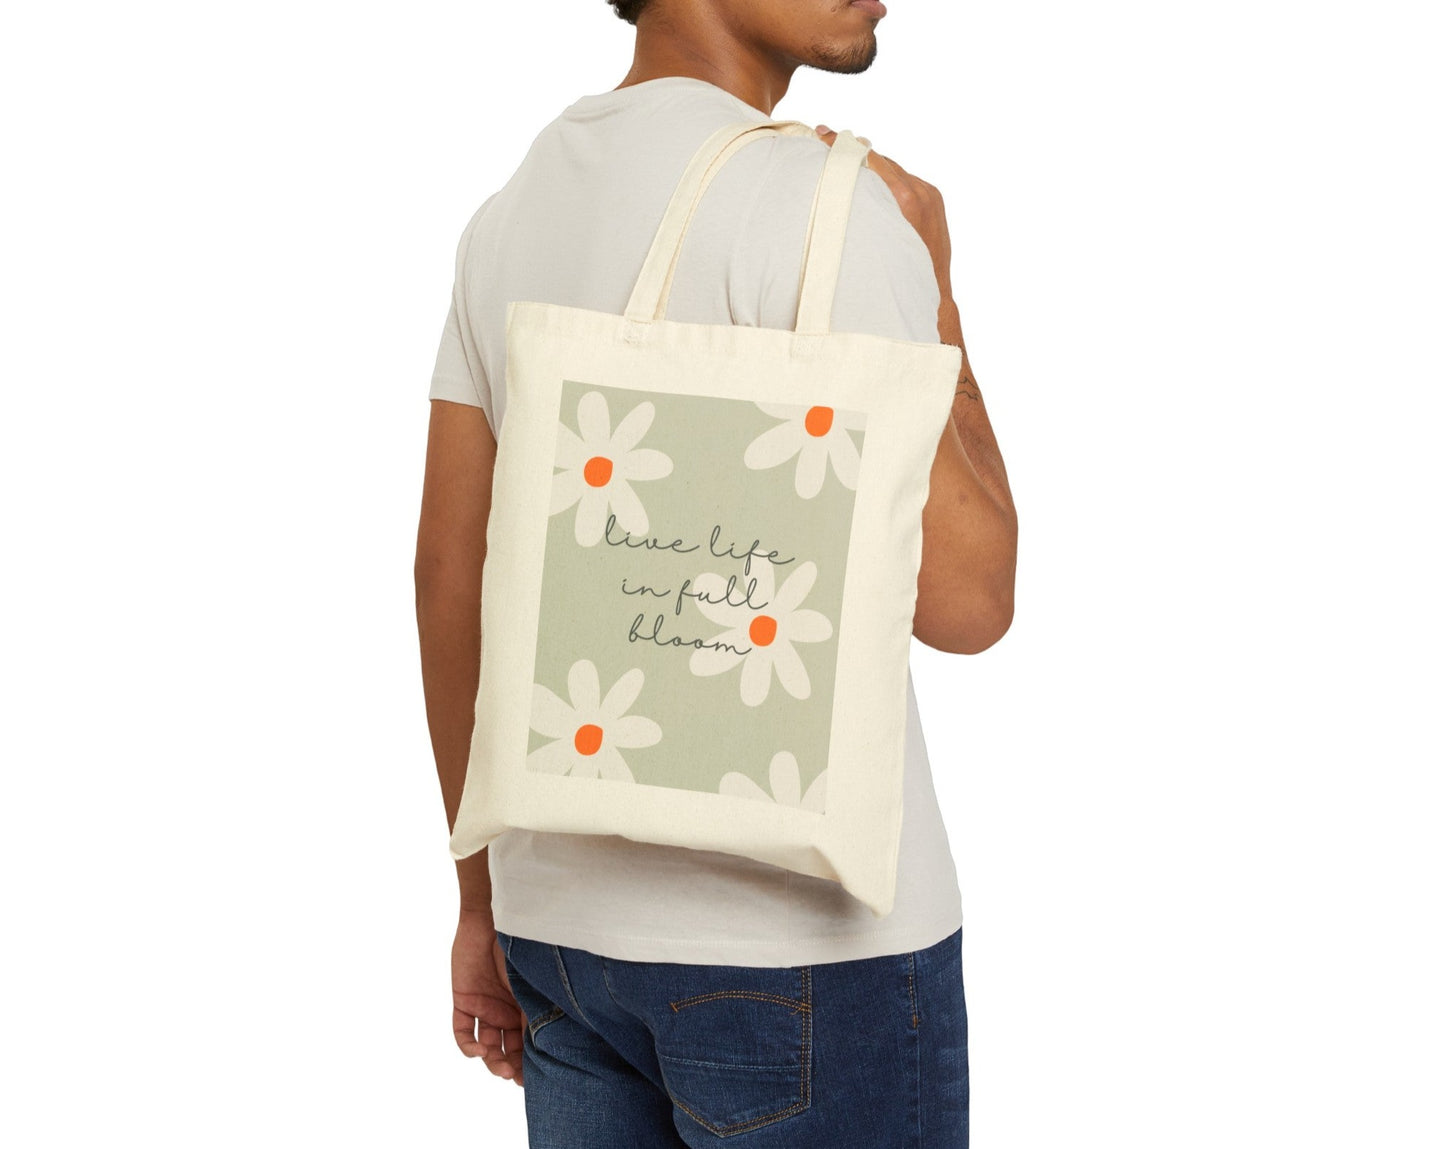 Daisy live life full bloom tote bag